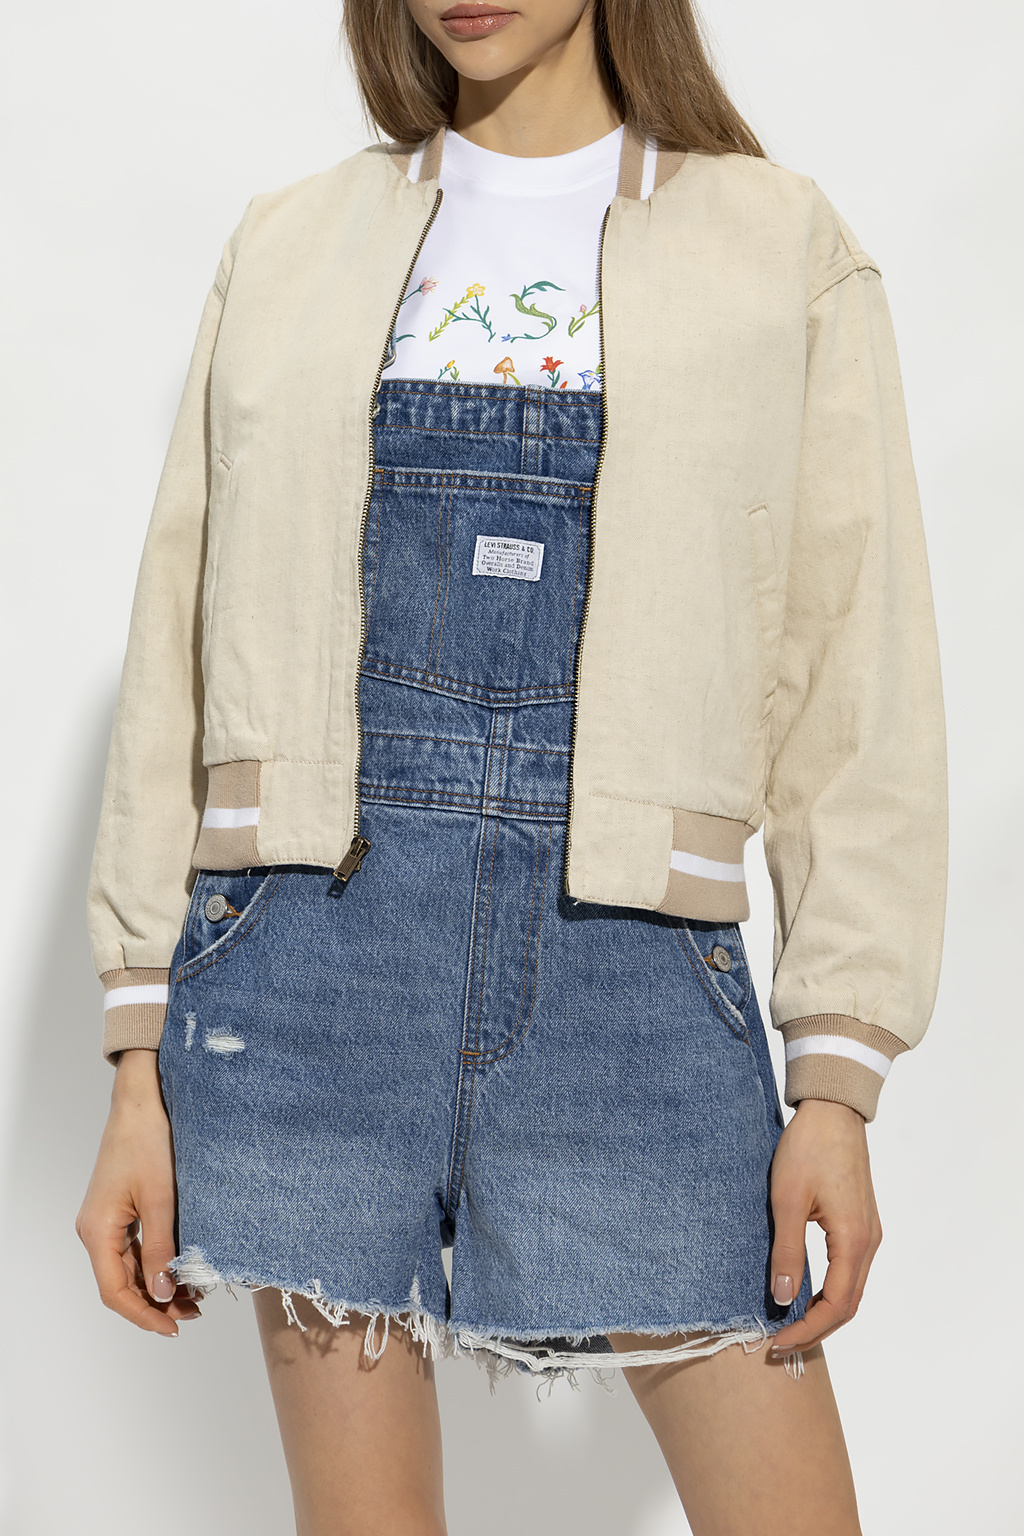 Levi's ‘Made & Crafted®’ collection jacket